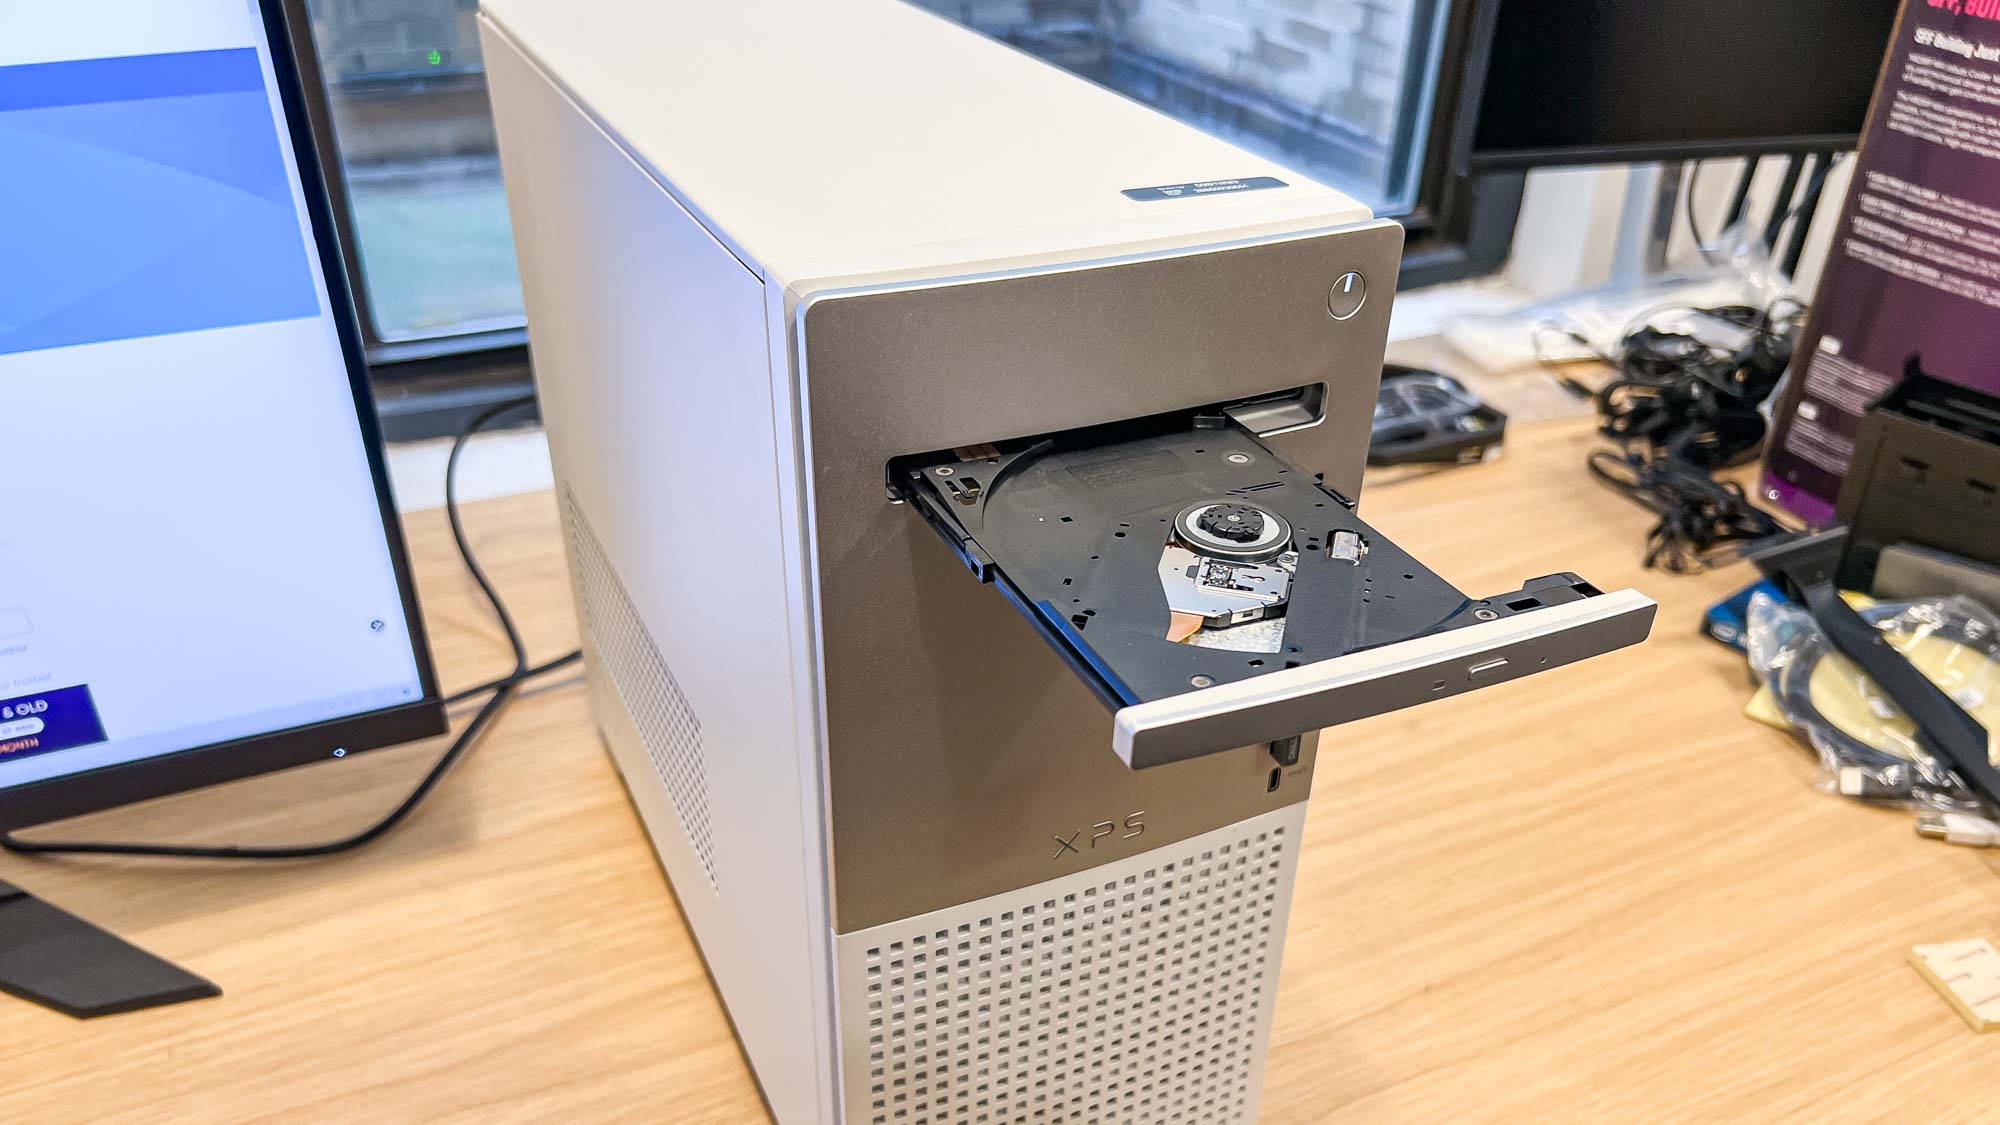 Dell XPS 8950 Desktop Computer on Desk with Open Optical Drive